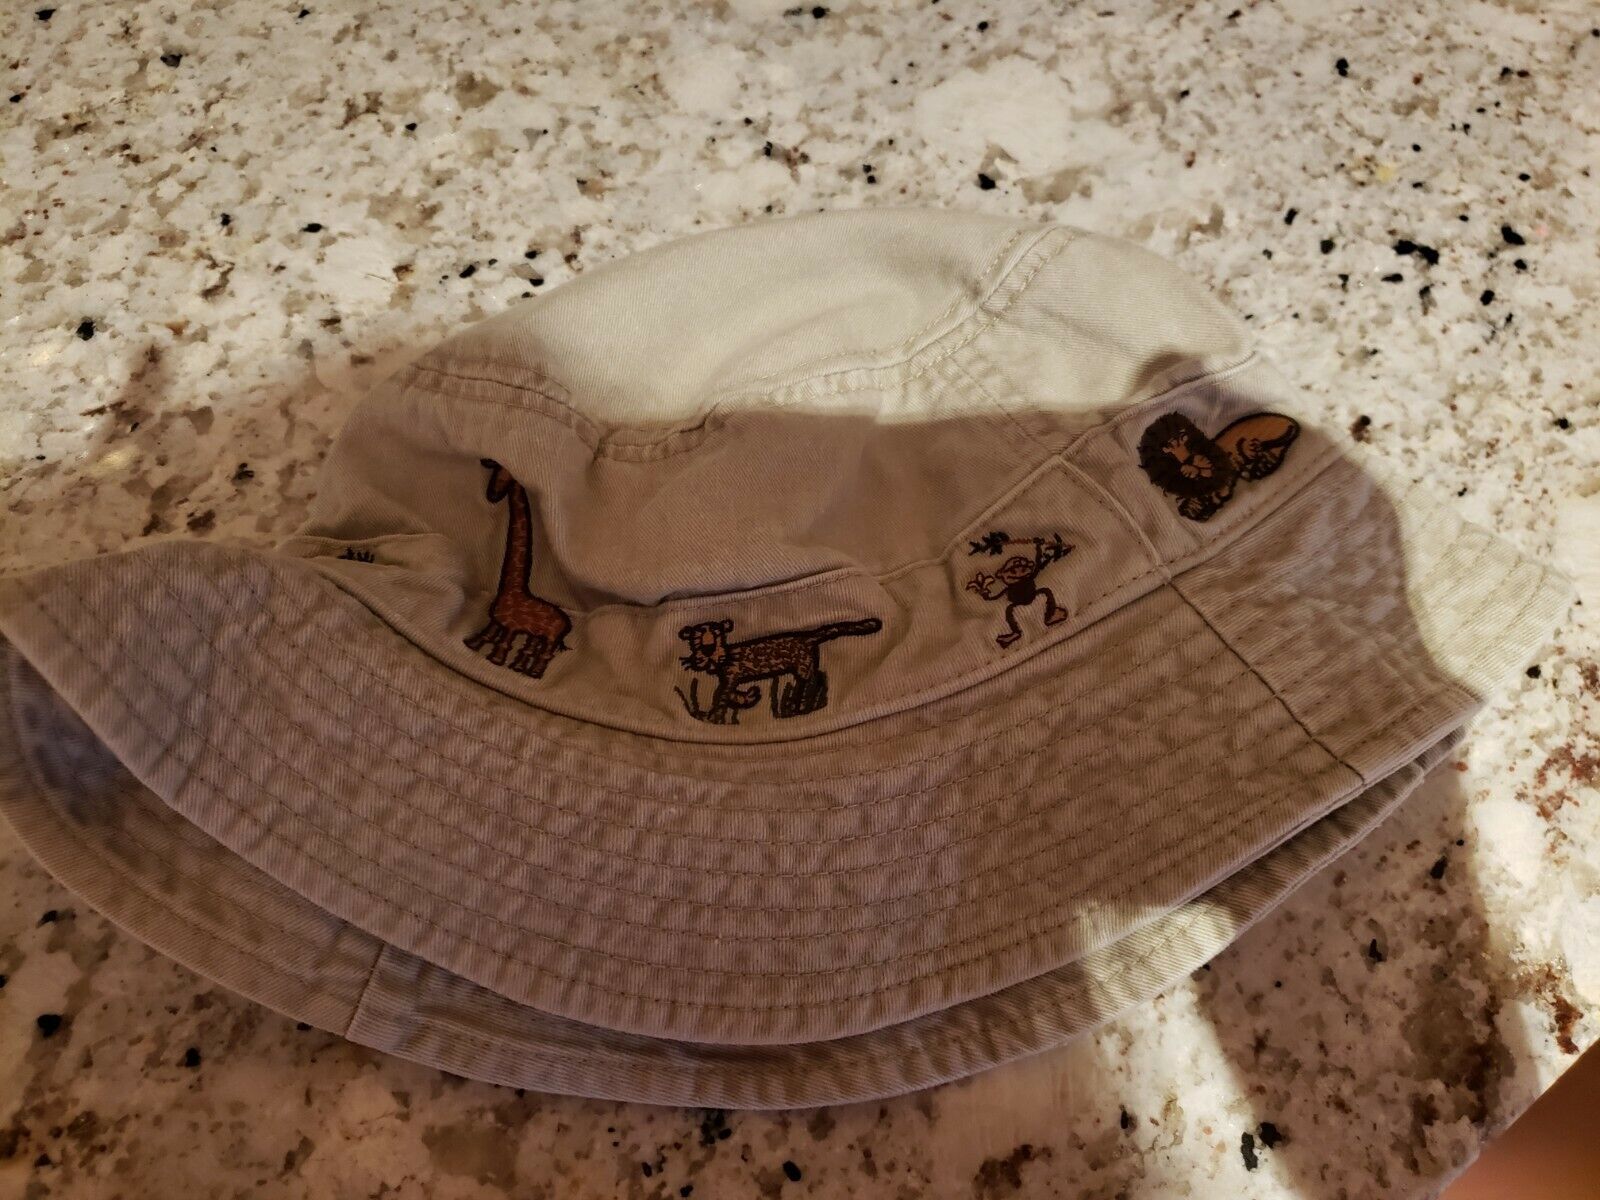 Unbranded Size Youth Sunhat (tan)